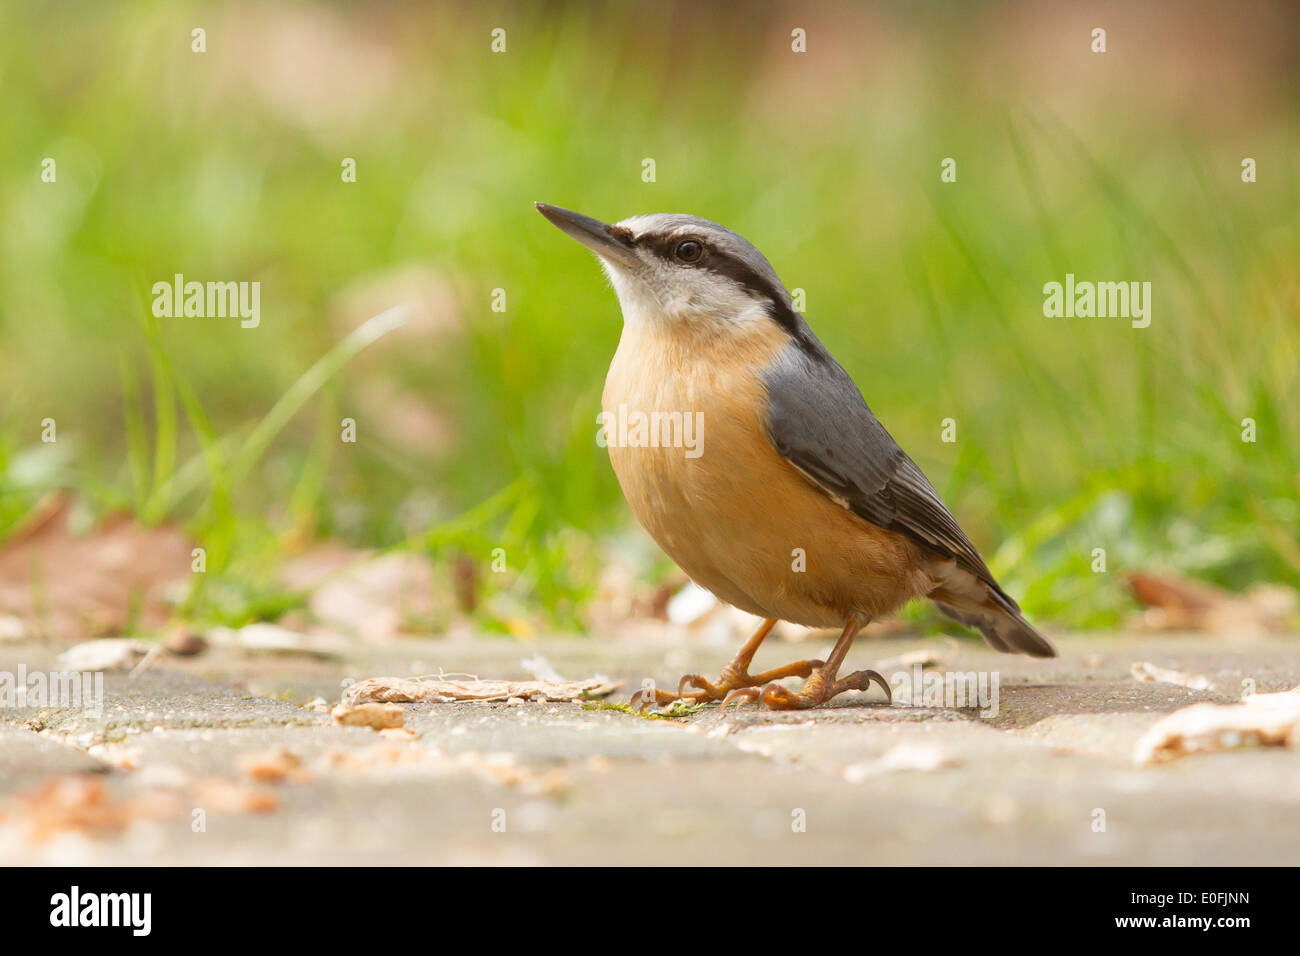 A Nuthatch on the ground eating peanuts Stock Photo